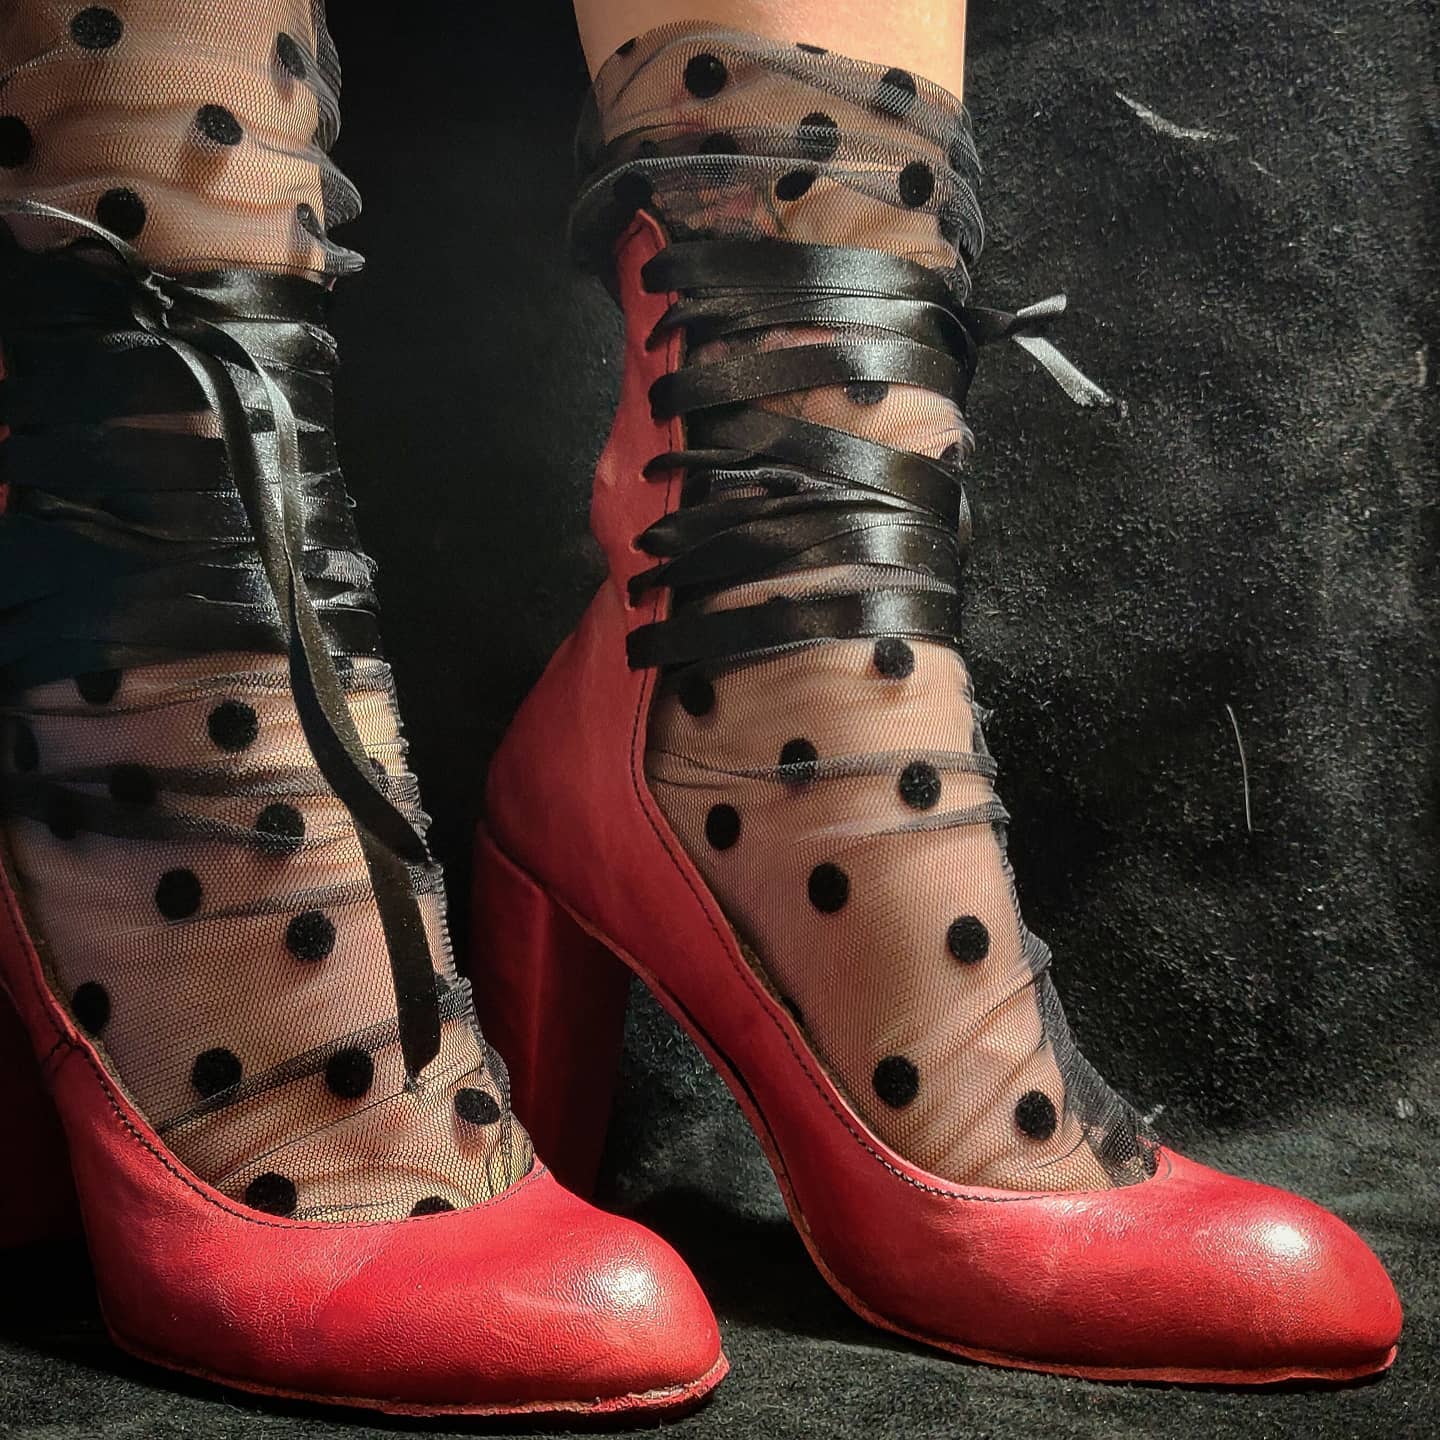 Red pumps with a 10cm block heel and a back panel going up on the back of the leg for aprox 15 cm high and held together on the leg with black silk lacing. They are also adorn and complemented by a tule sock with black dots 